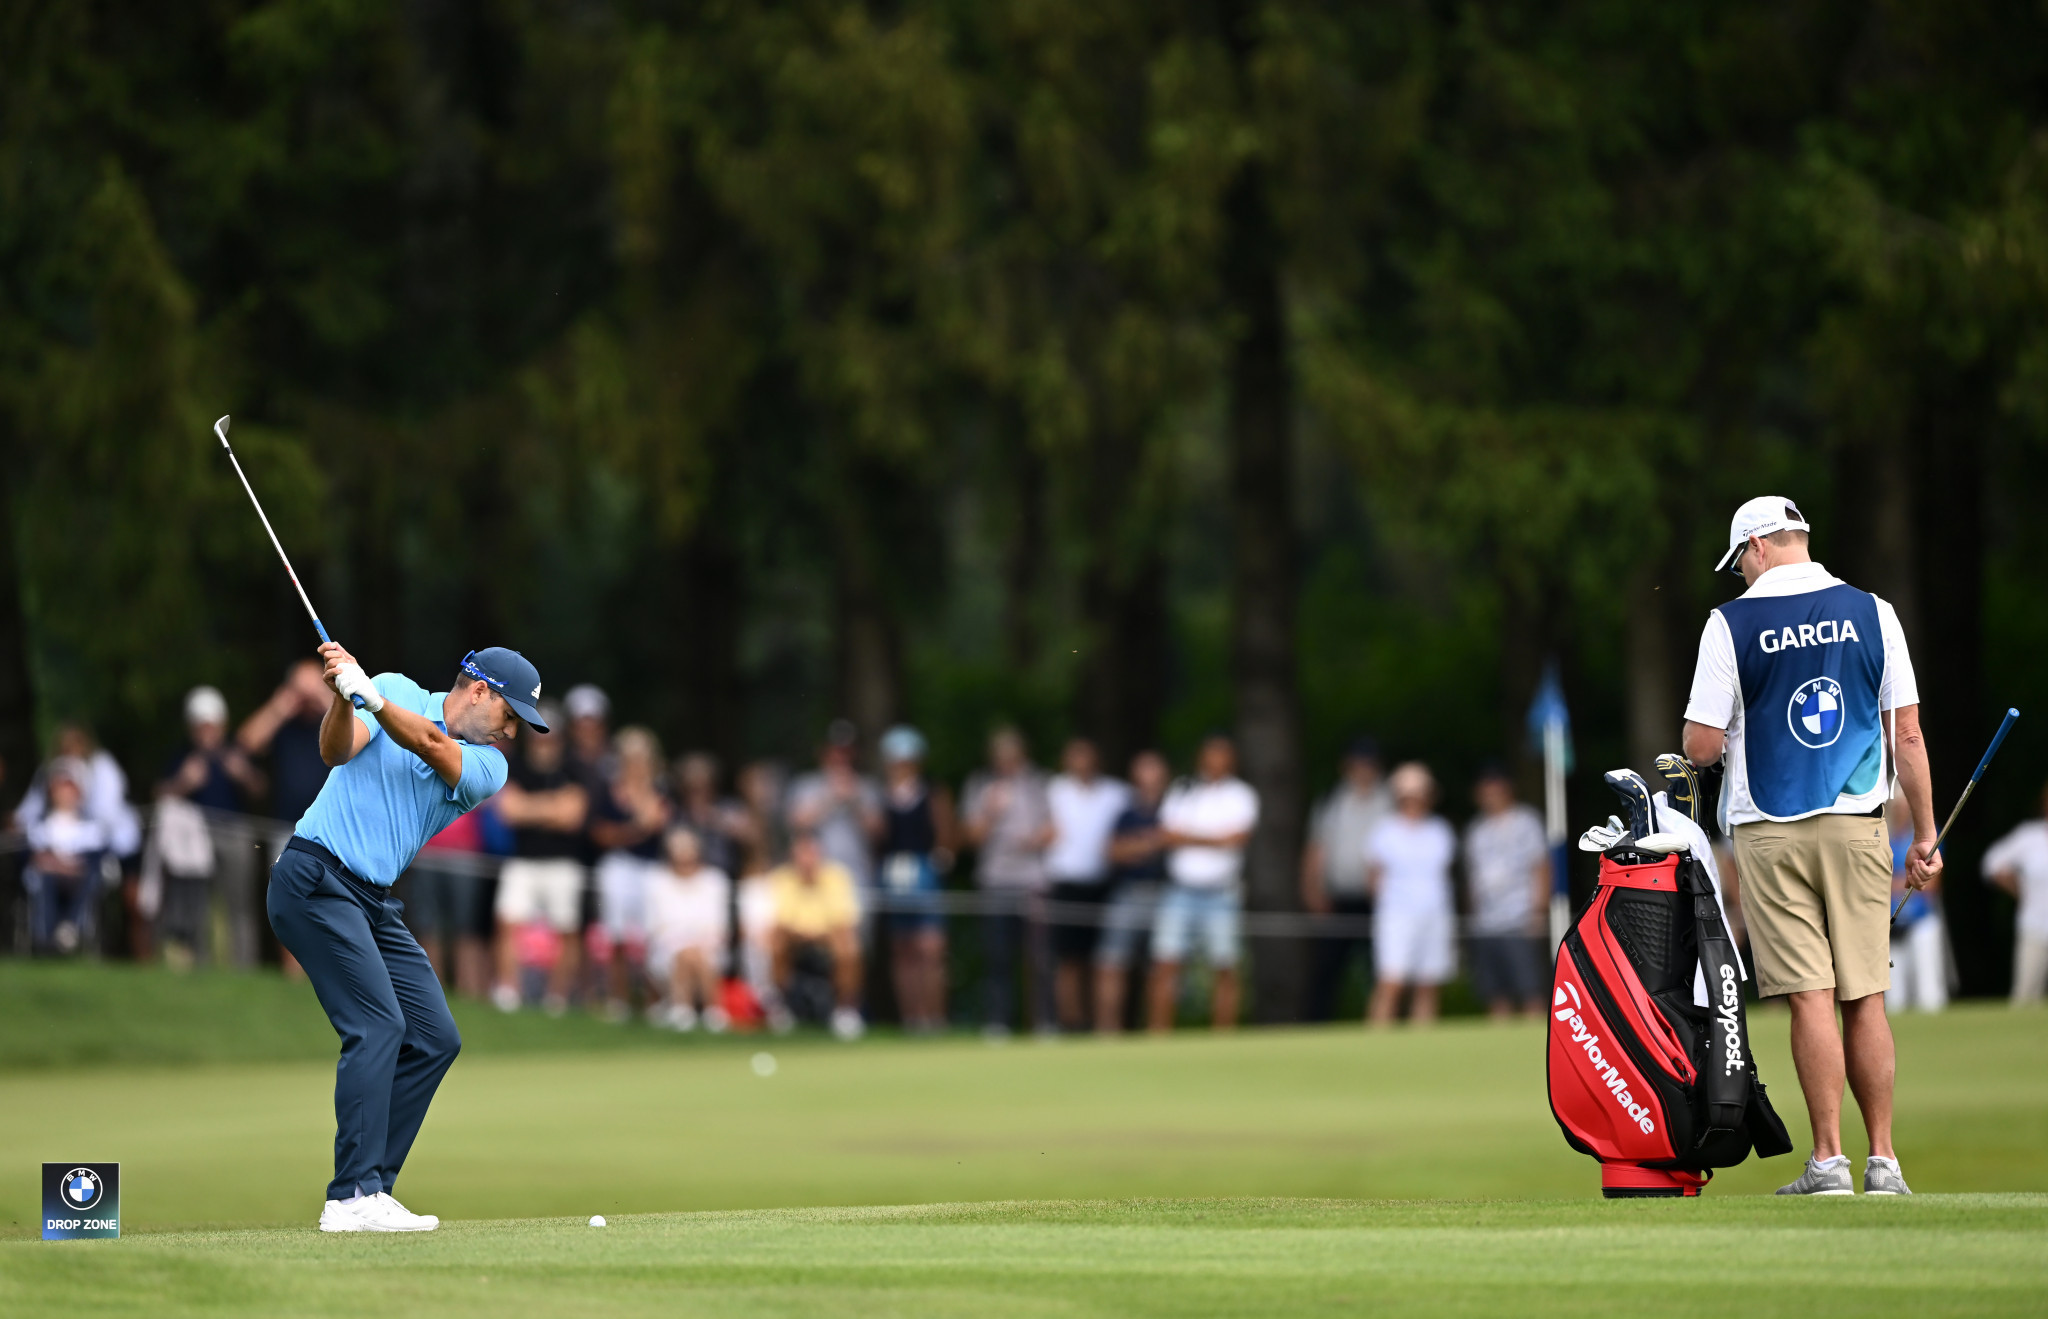 Sergio Garcia was among the high-profile DP World Tour players to join the LIV Golf ranks, and the Spaniard is due to play in the promotion's next event in Portland  ©Getty Images